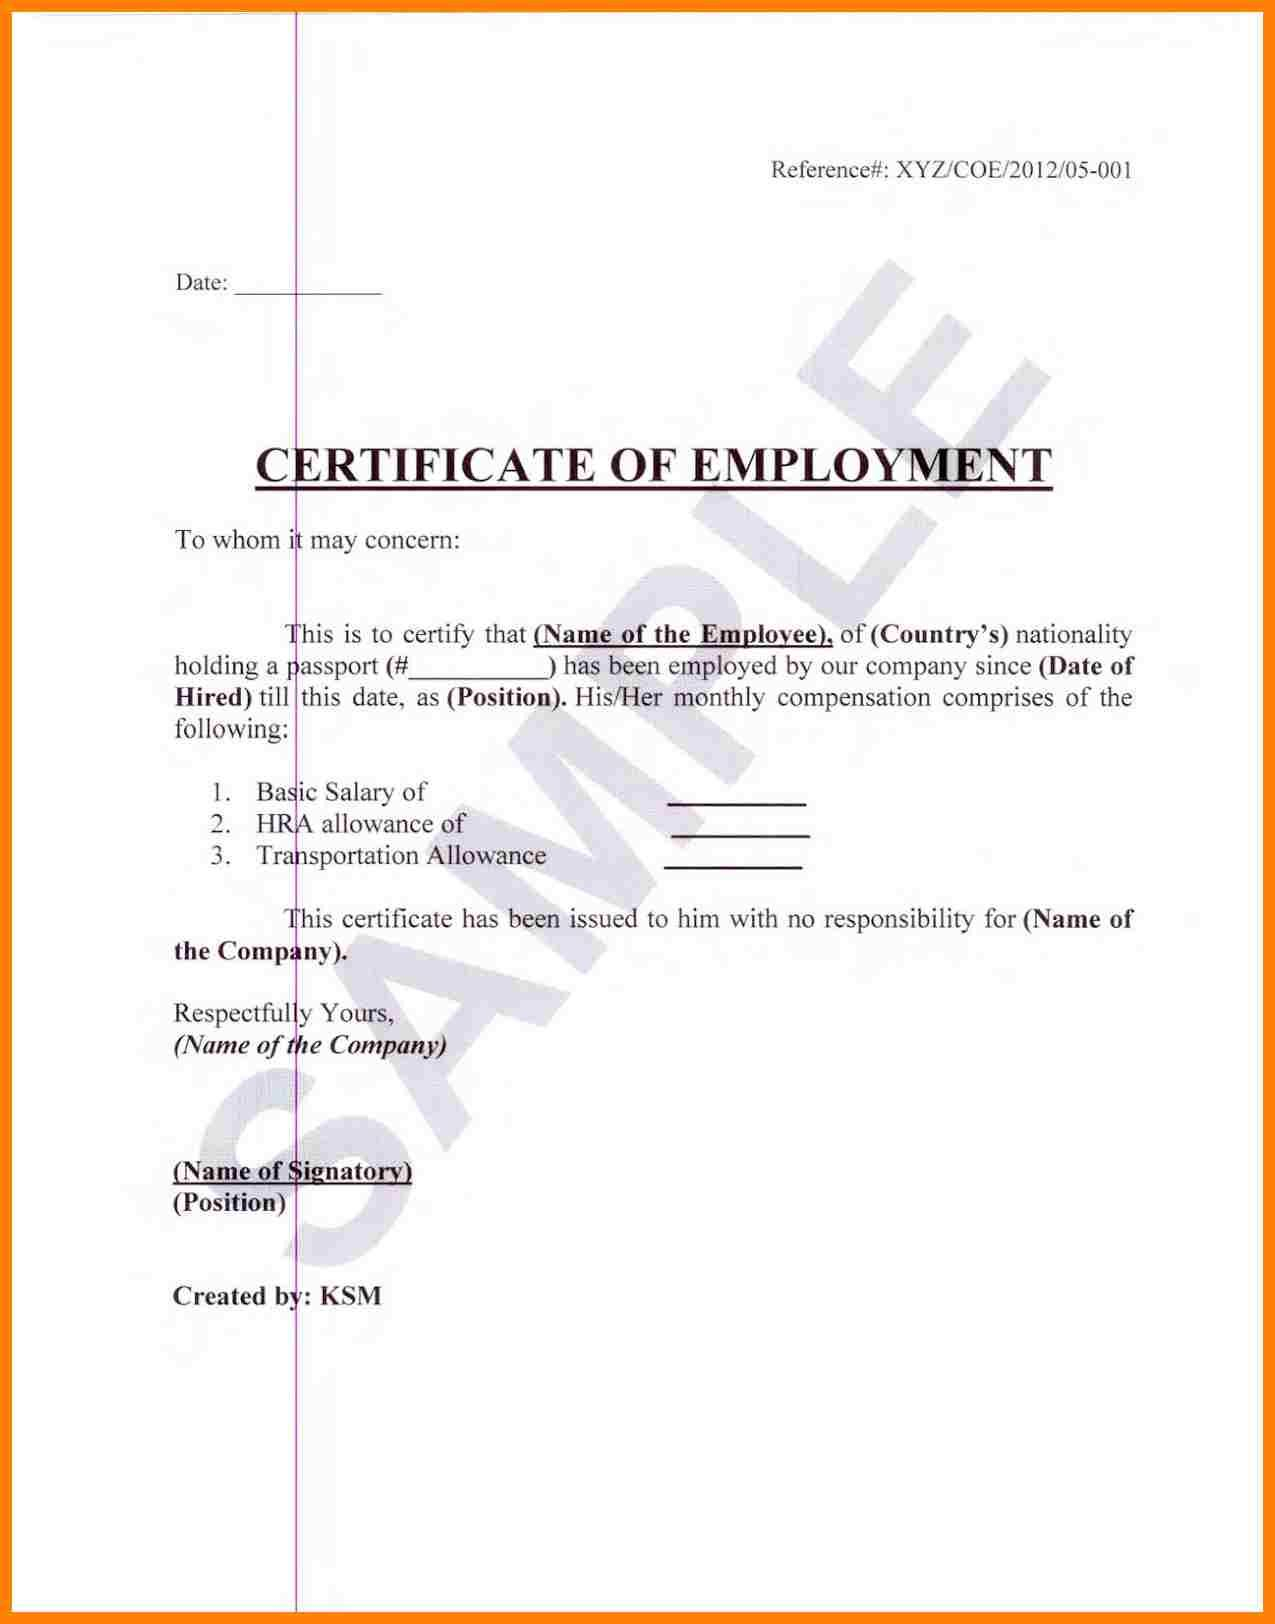 Sample Certificate Of Employment Certification Tugon Med Regarding Certificate Of Service Template Free